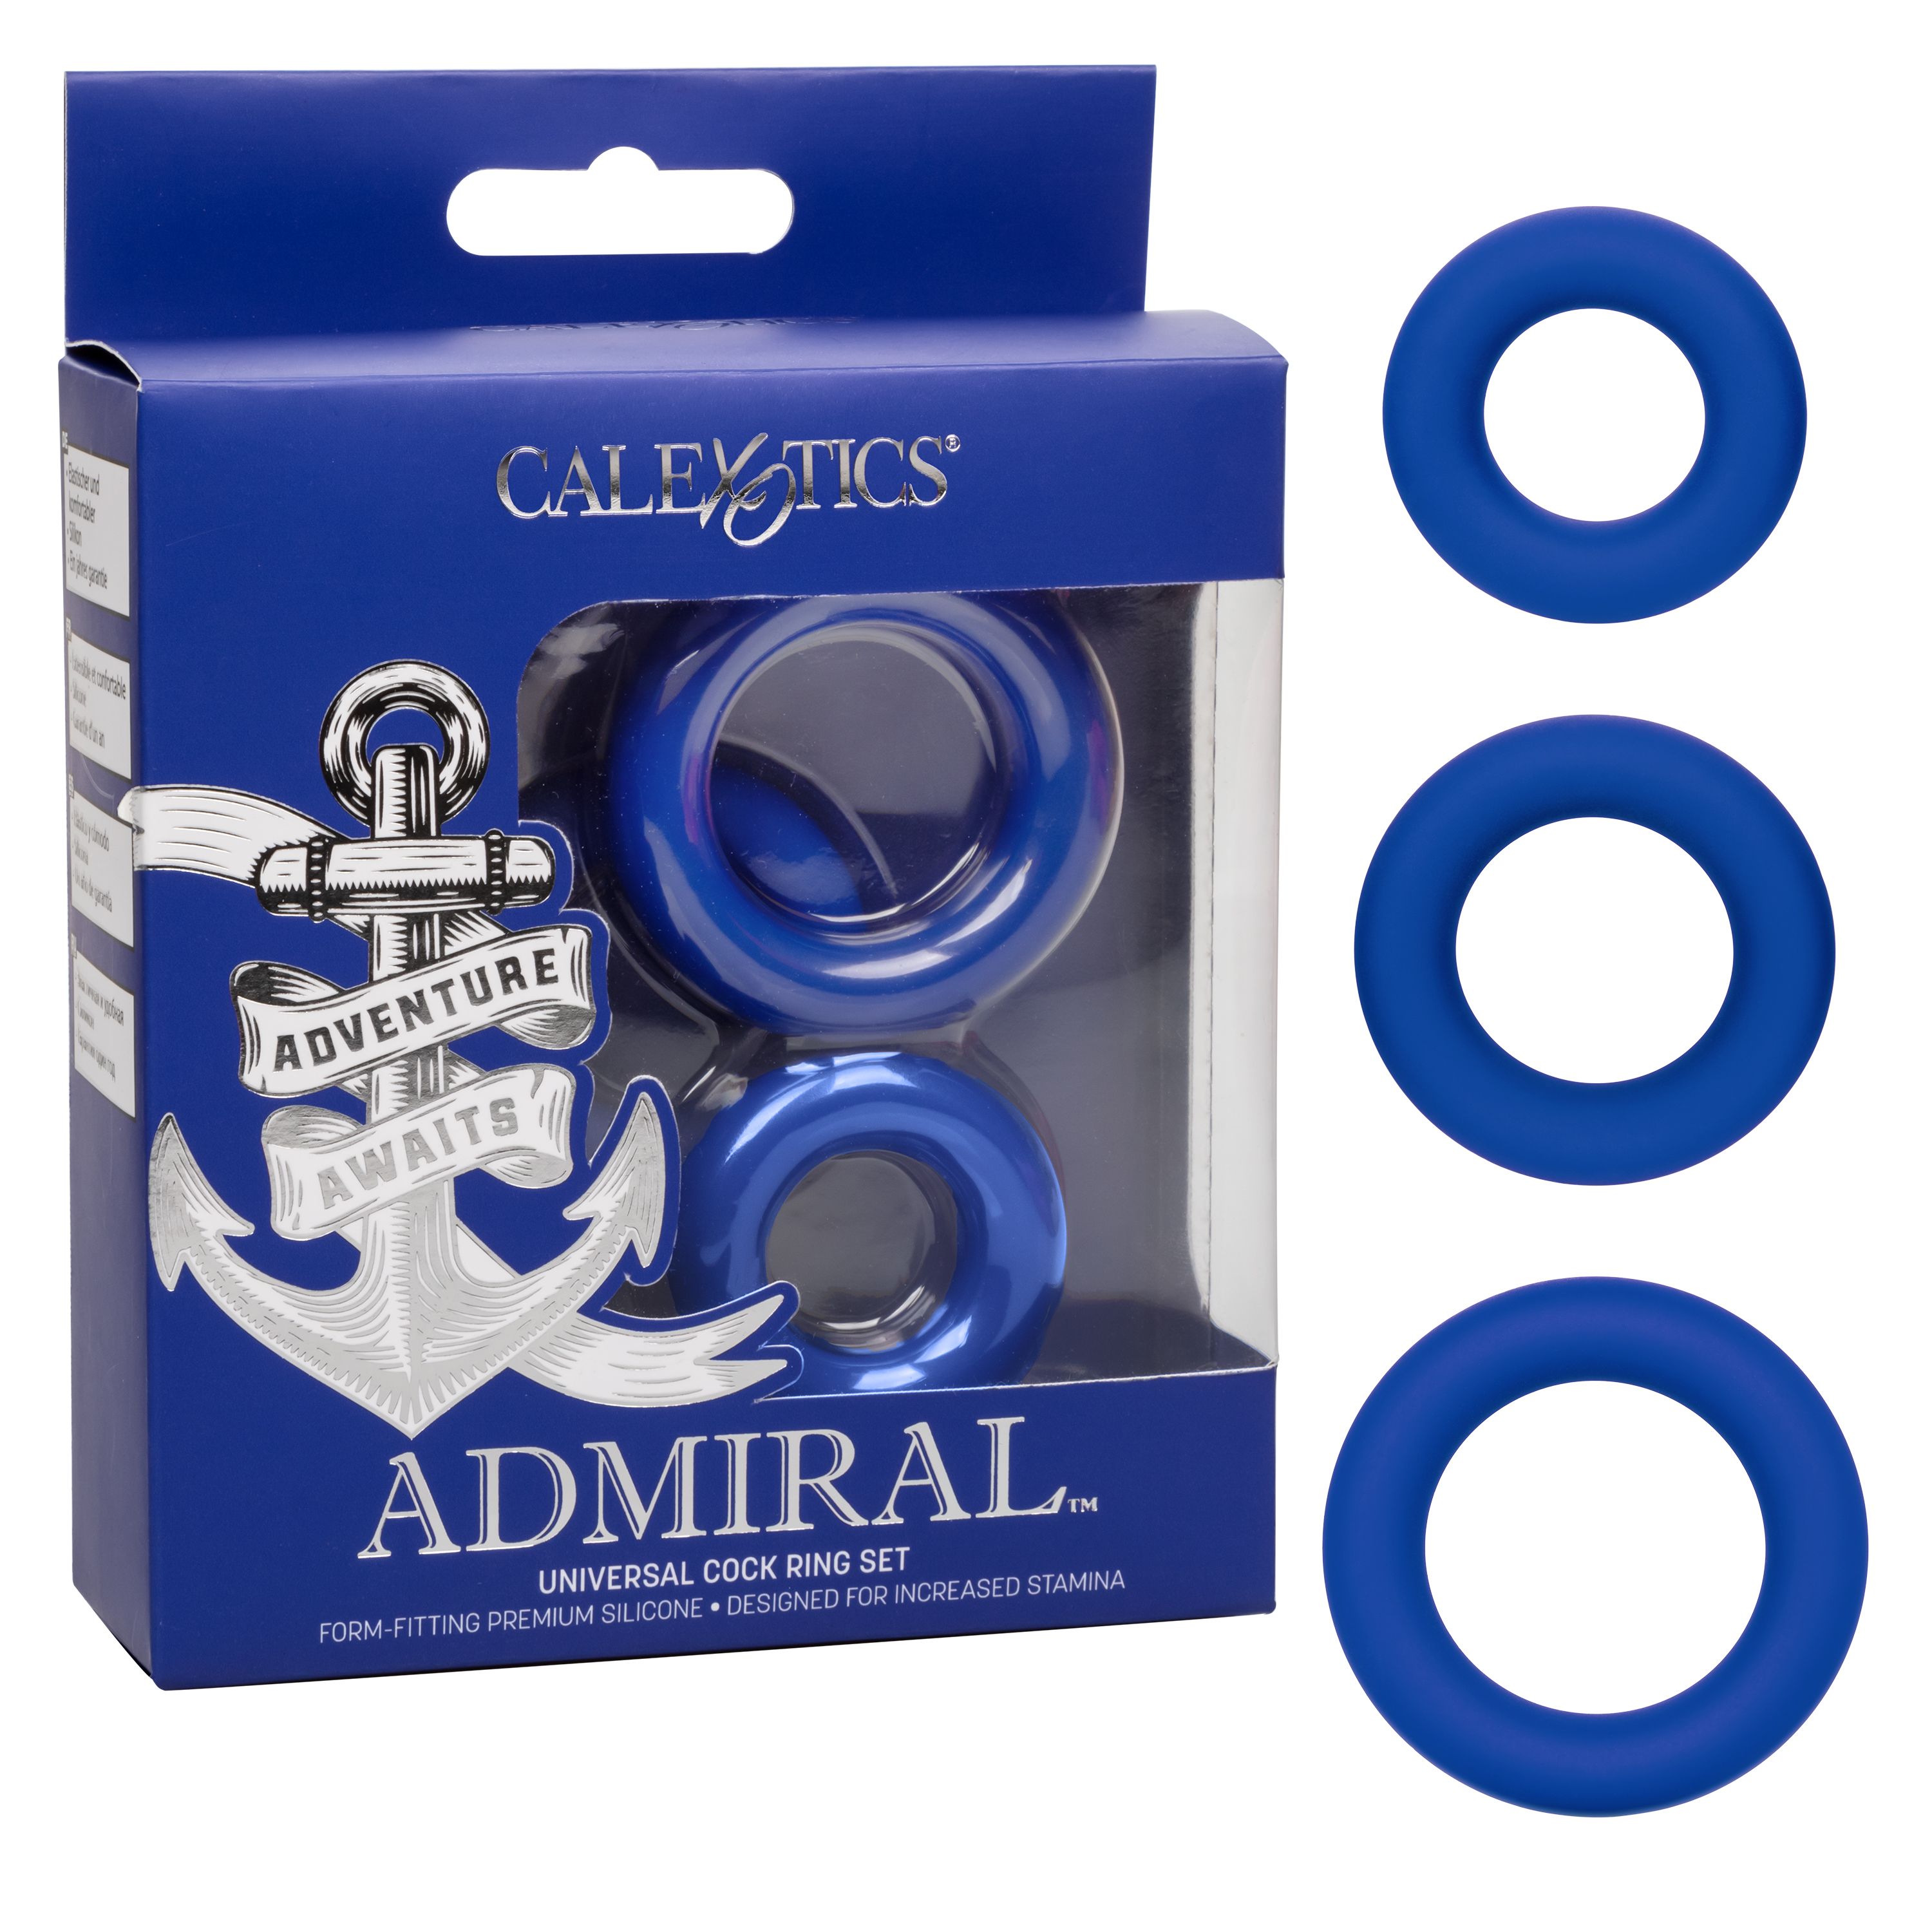 ADMIRAL UNIVERSAL COCK RING SET - Click Image to Close